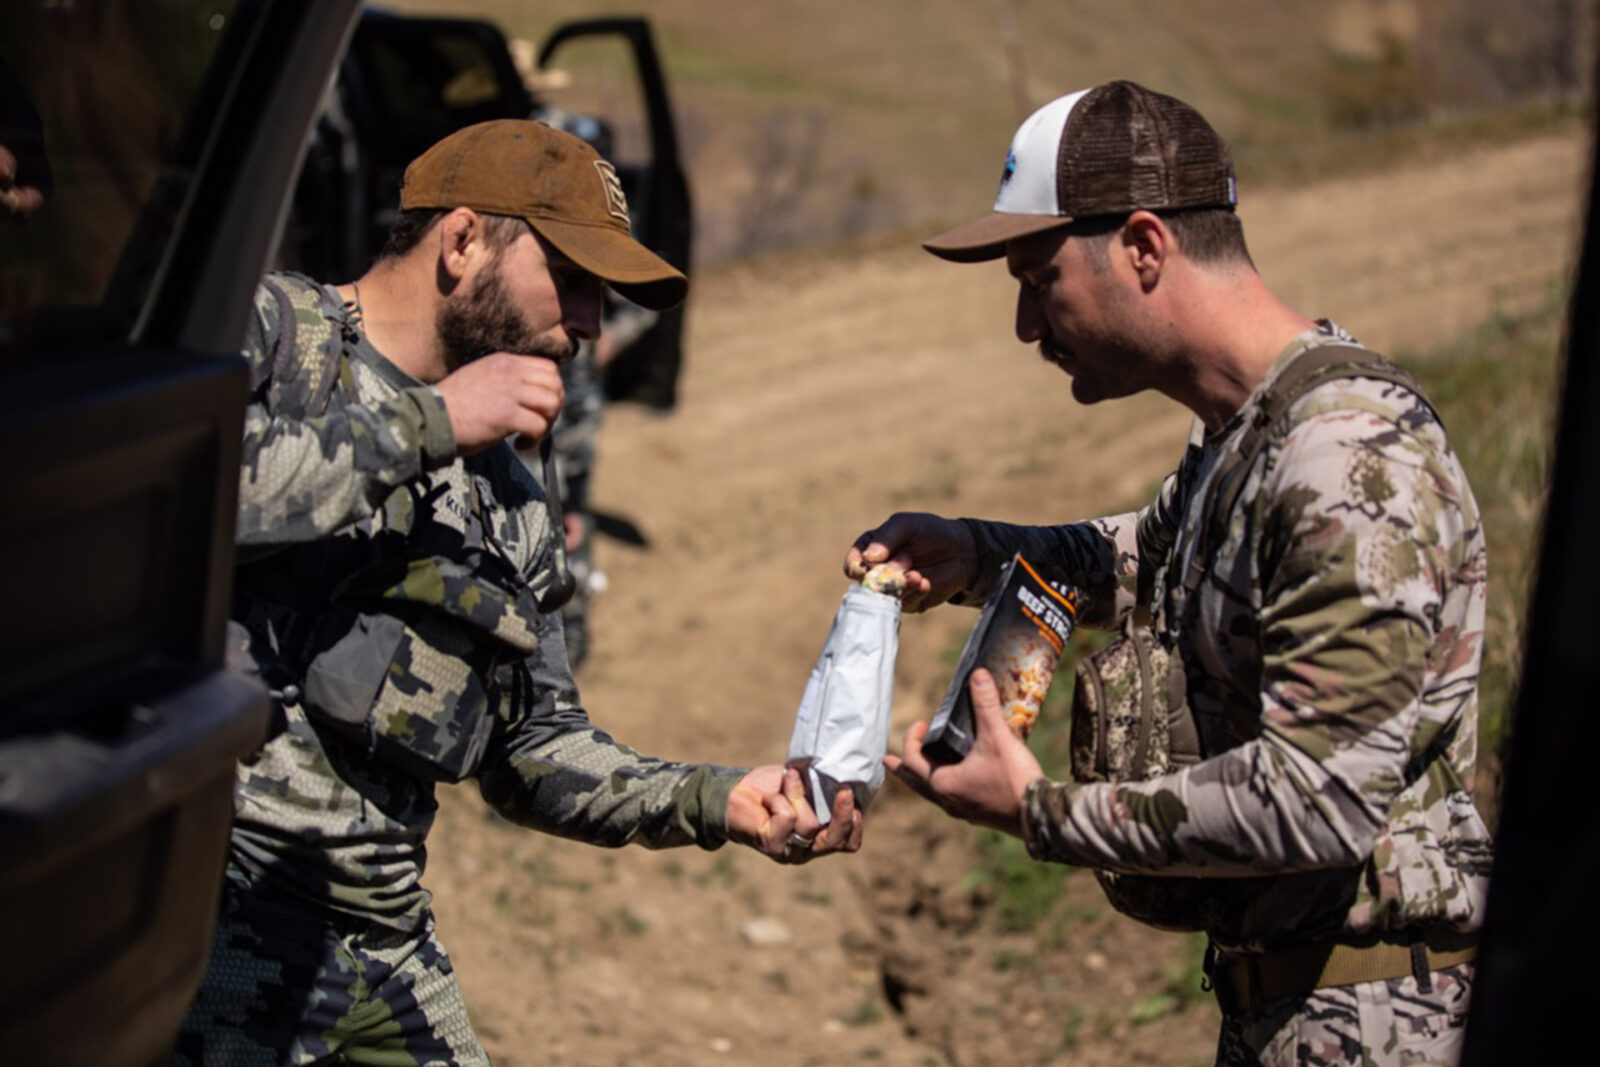 Two hunters take a meal break back at their trucks. One hunter is letting the other try his Peak Refuel meal. 